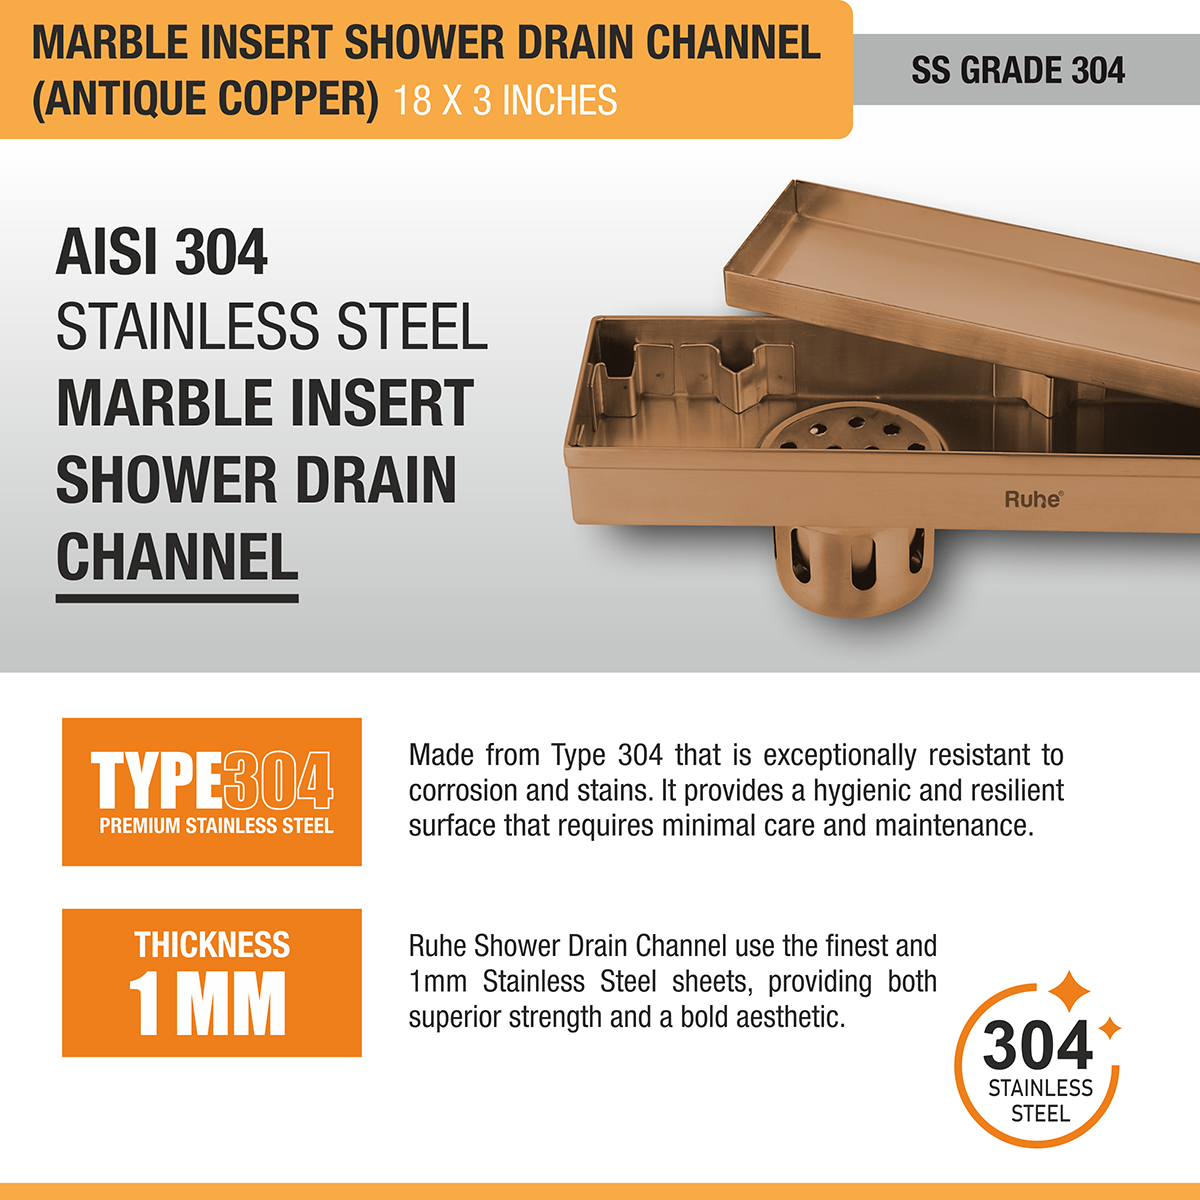 Marble Insert Shower Drain Channel (18 x 3 Inches) ROSE GOLD PVD Coated stainless steel